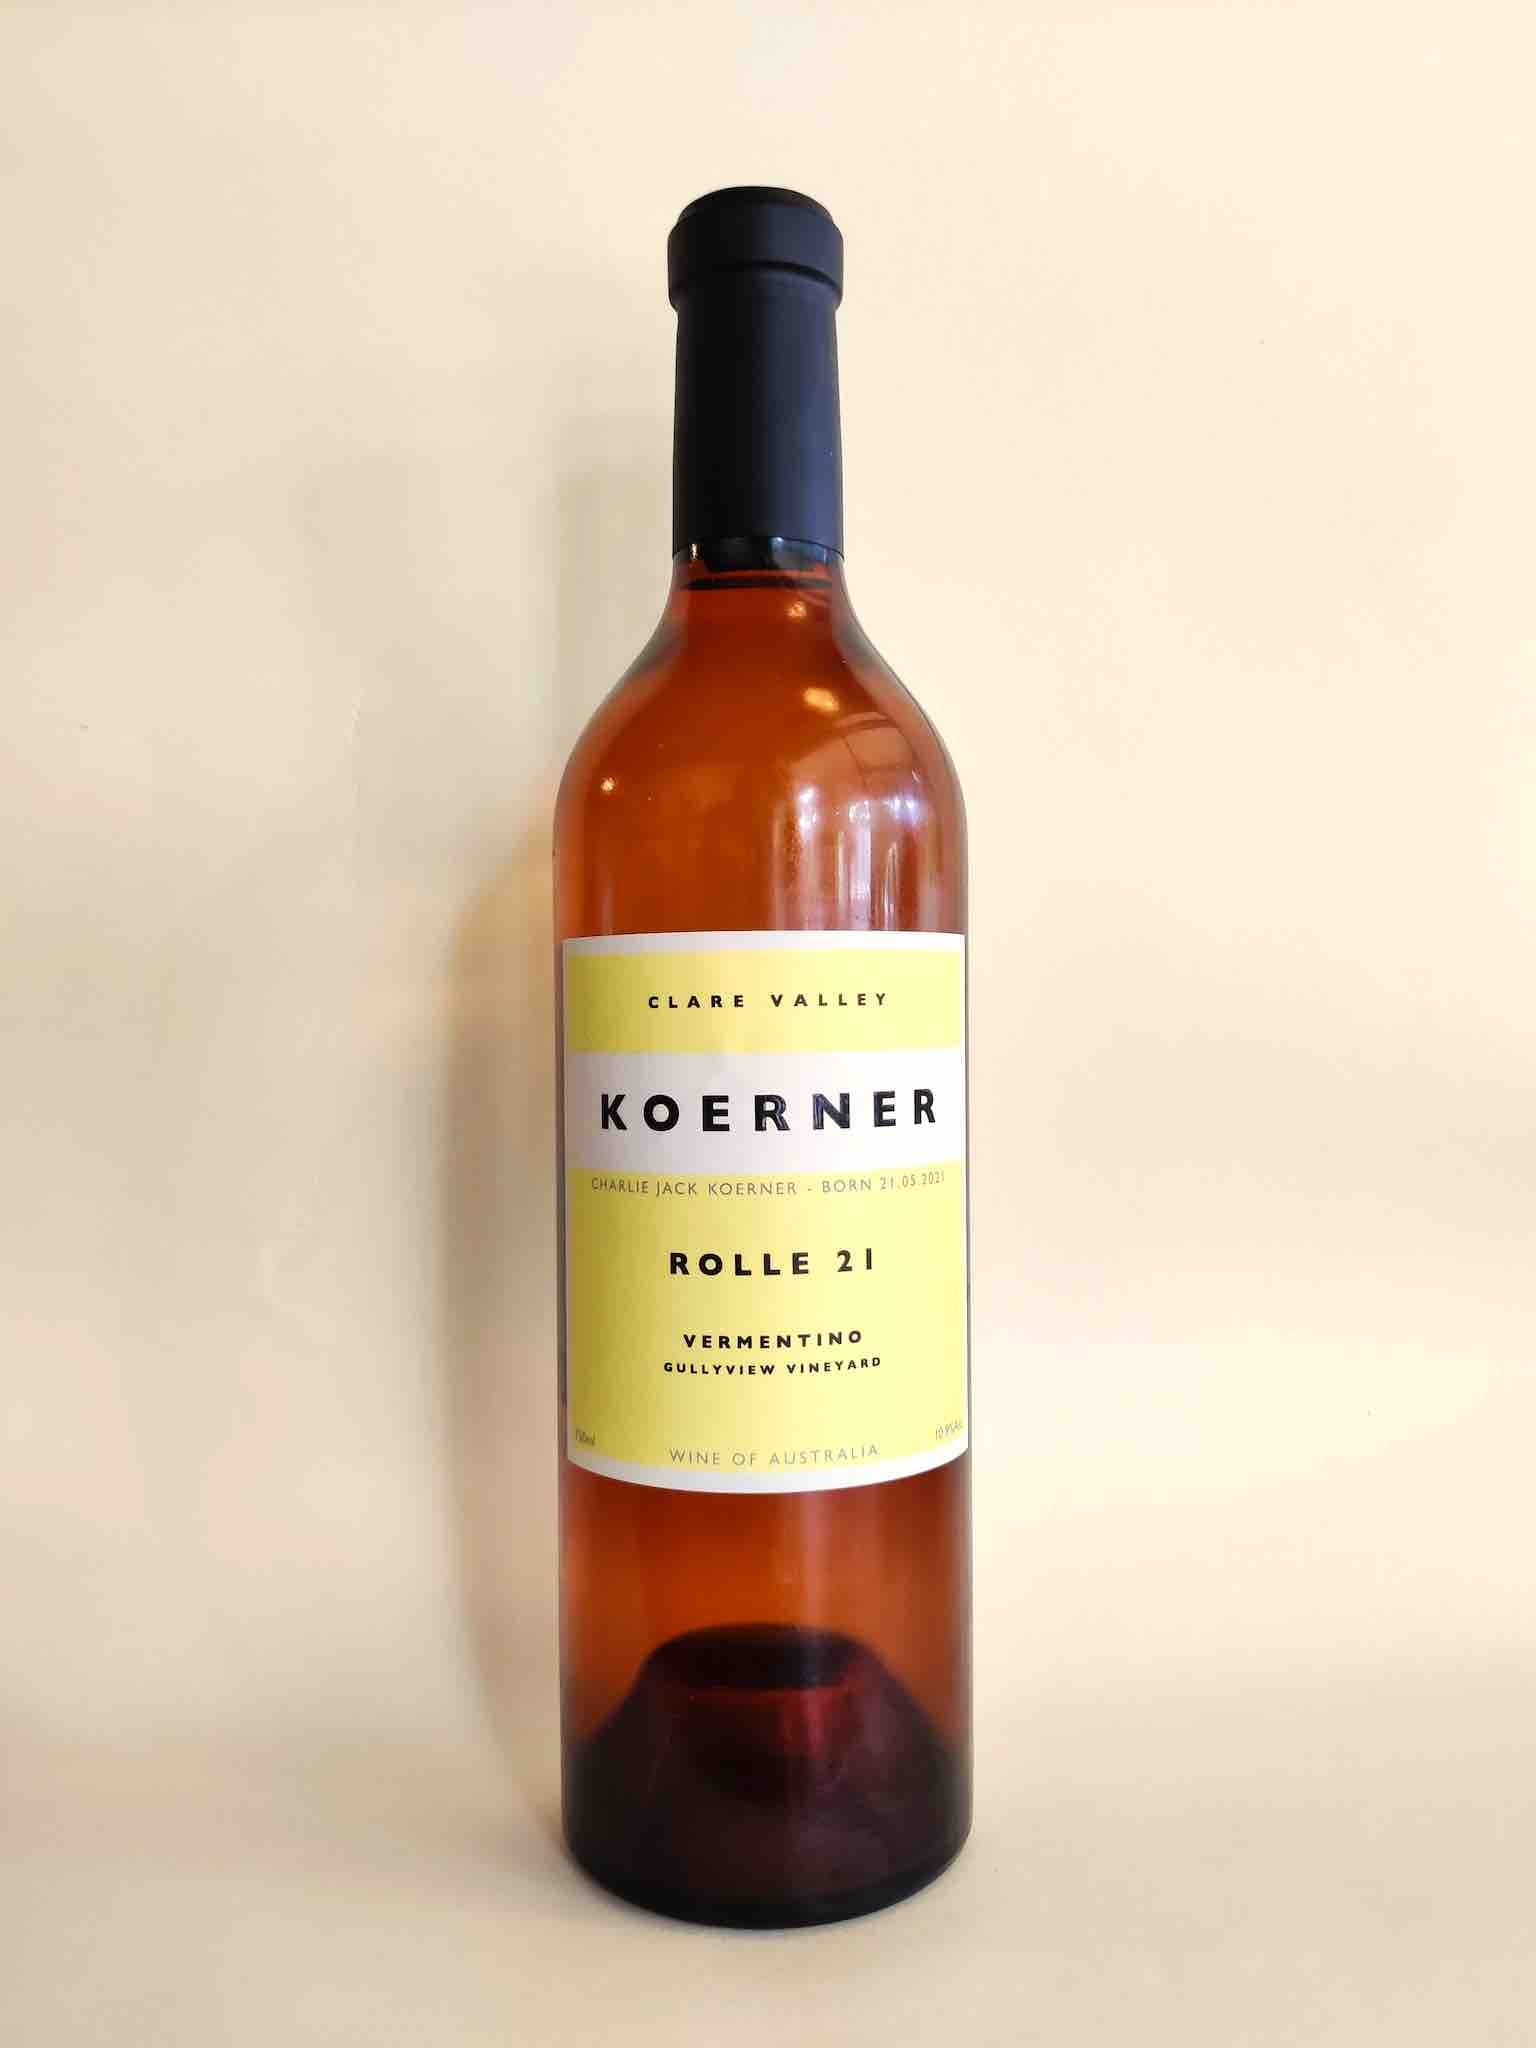 A bottle of Koerner Rolle Vermentino from Clare Valley, South Australia.